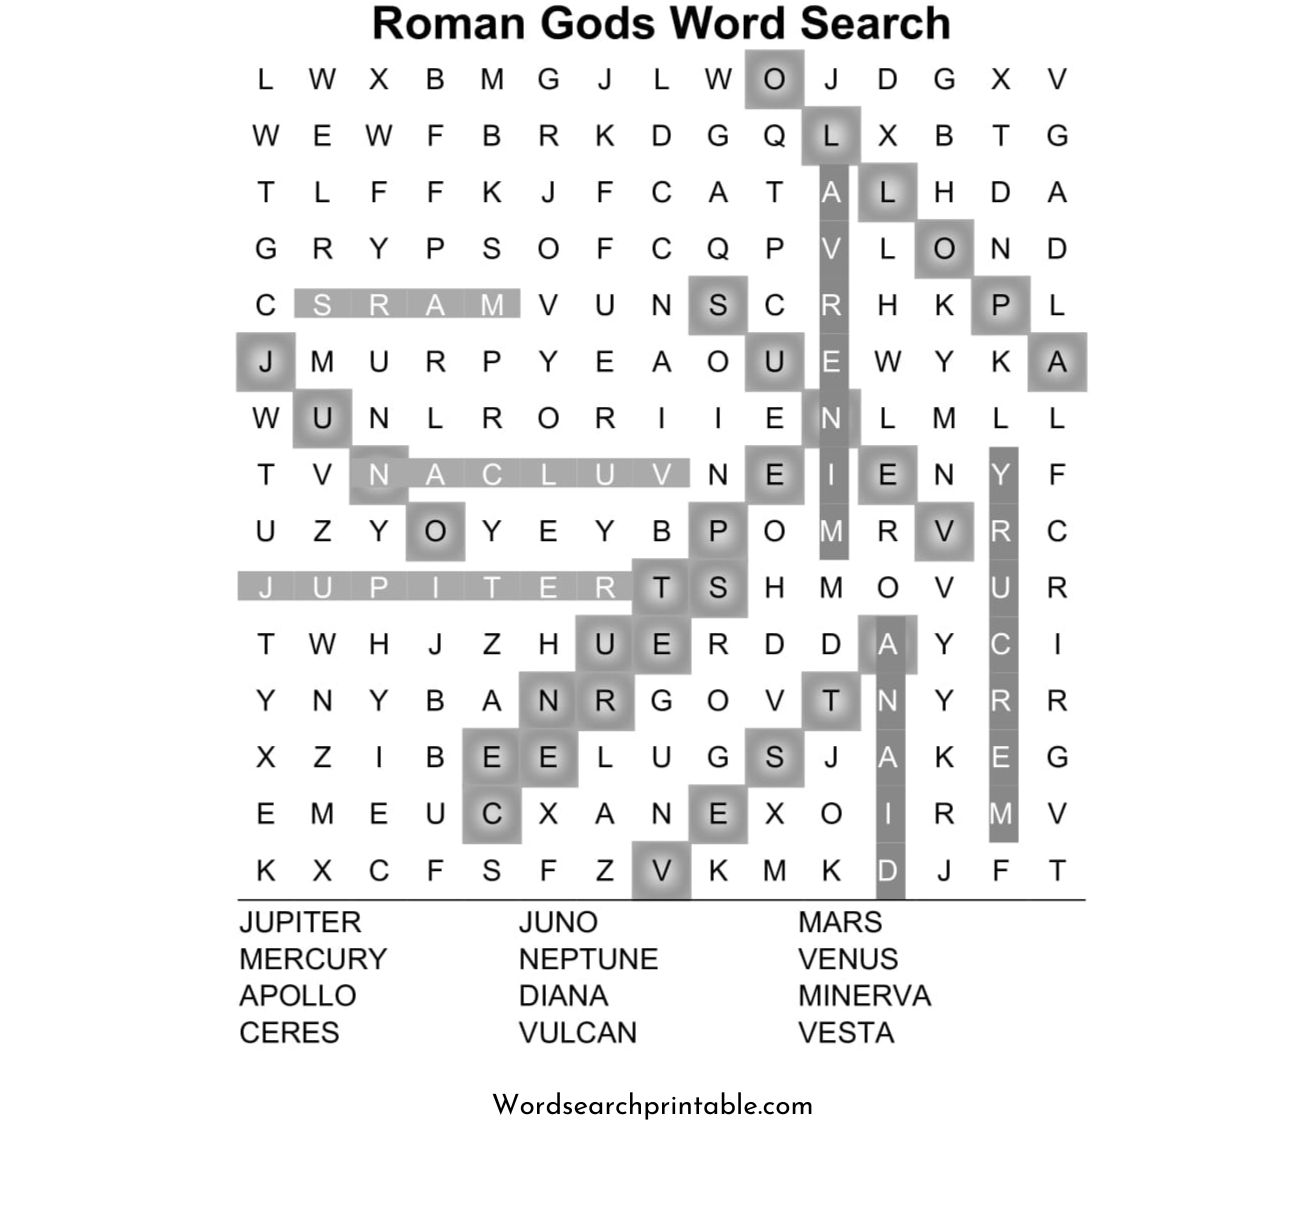 roman gods word search puzzle solution